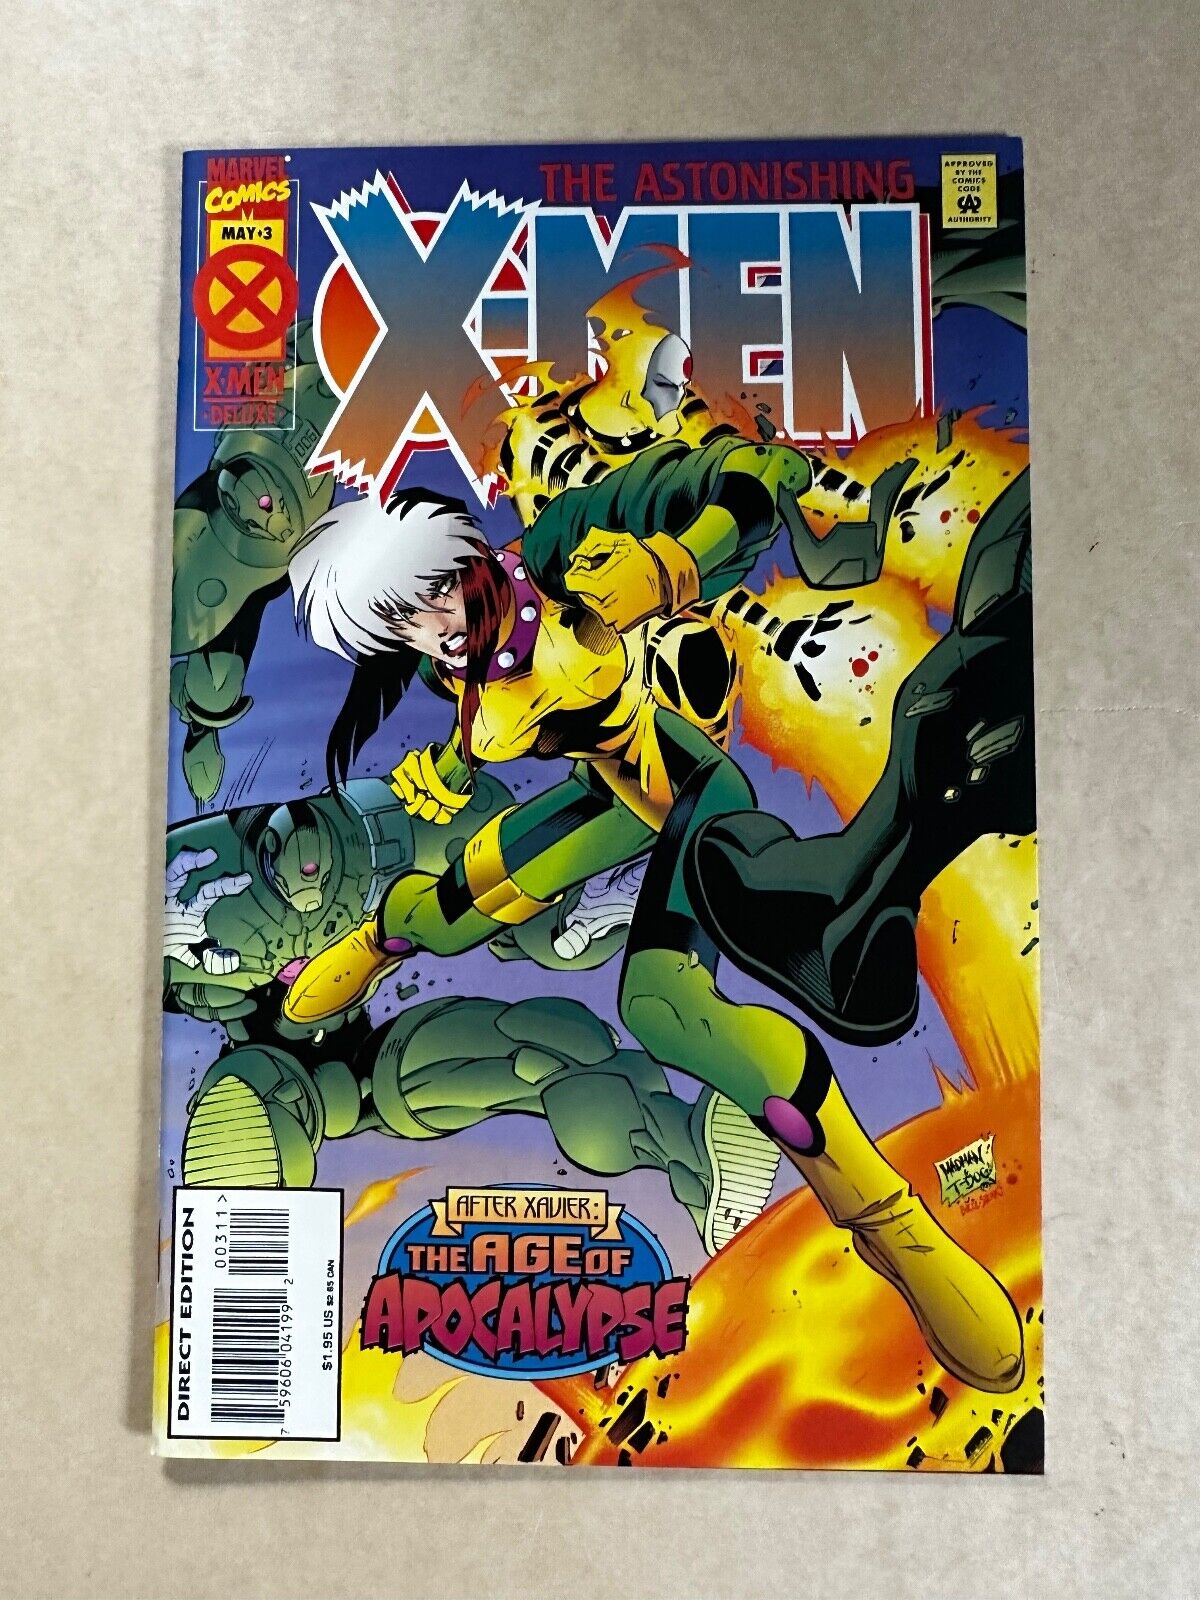 The Astonishing X-Men #3 - AFTER XAVIER: AGE OF APOCALYPSE Marvel May 1995